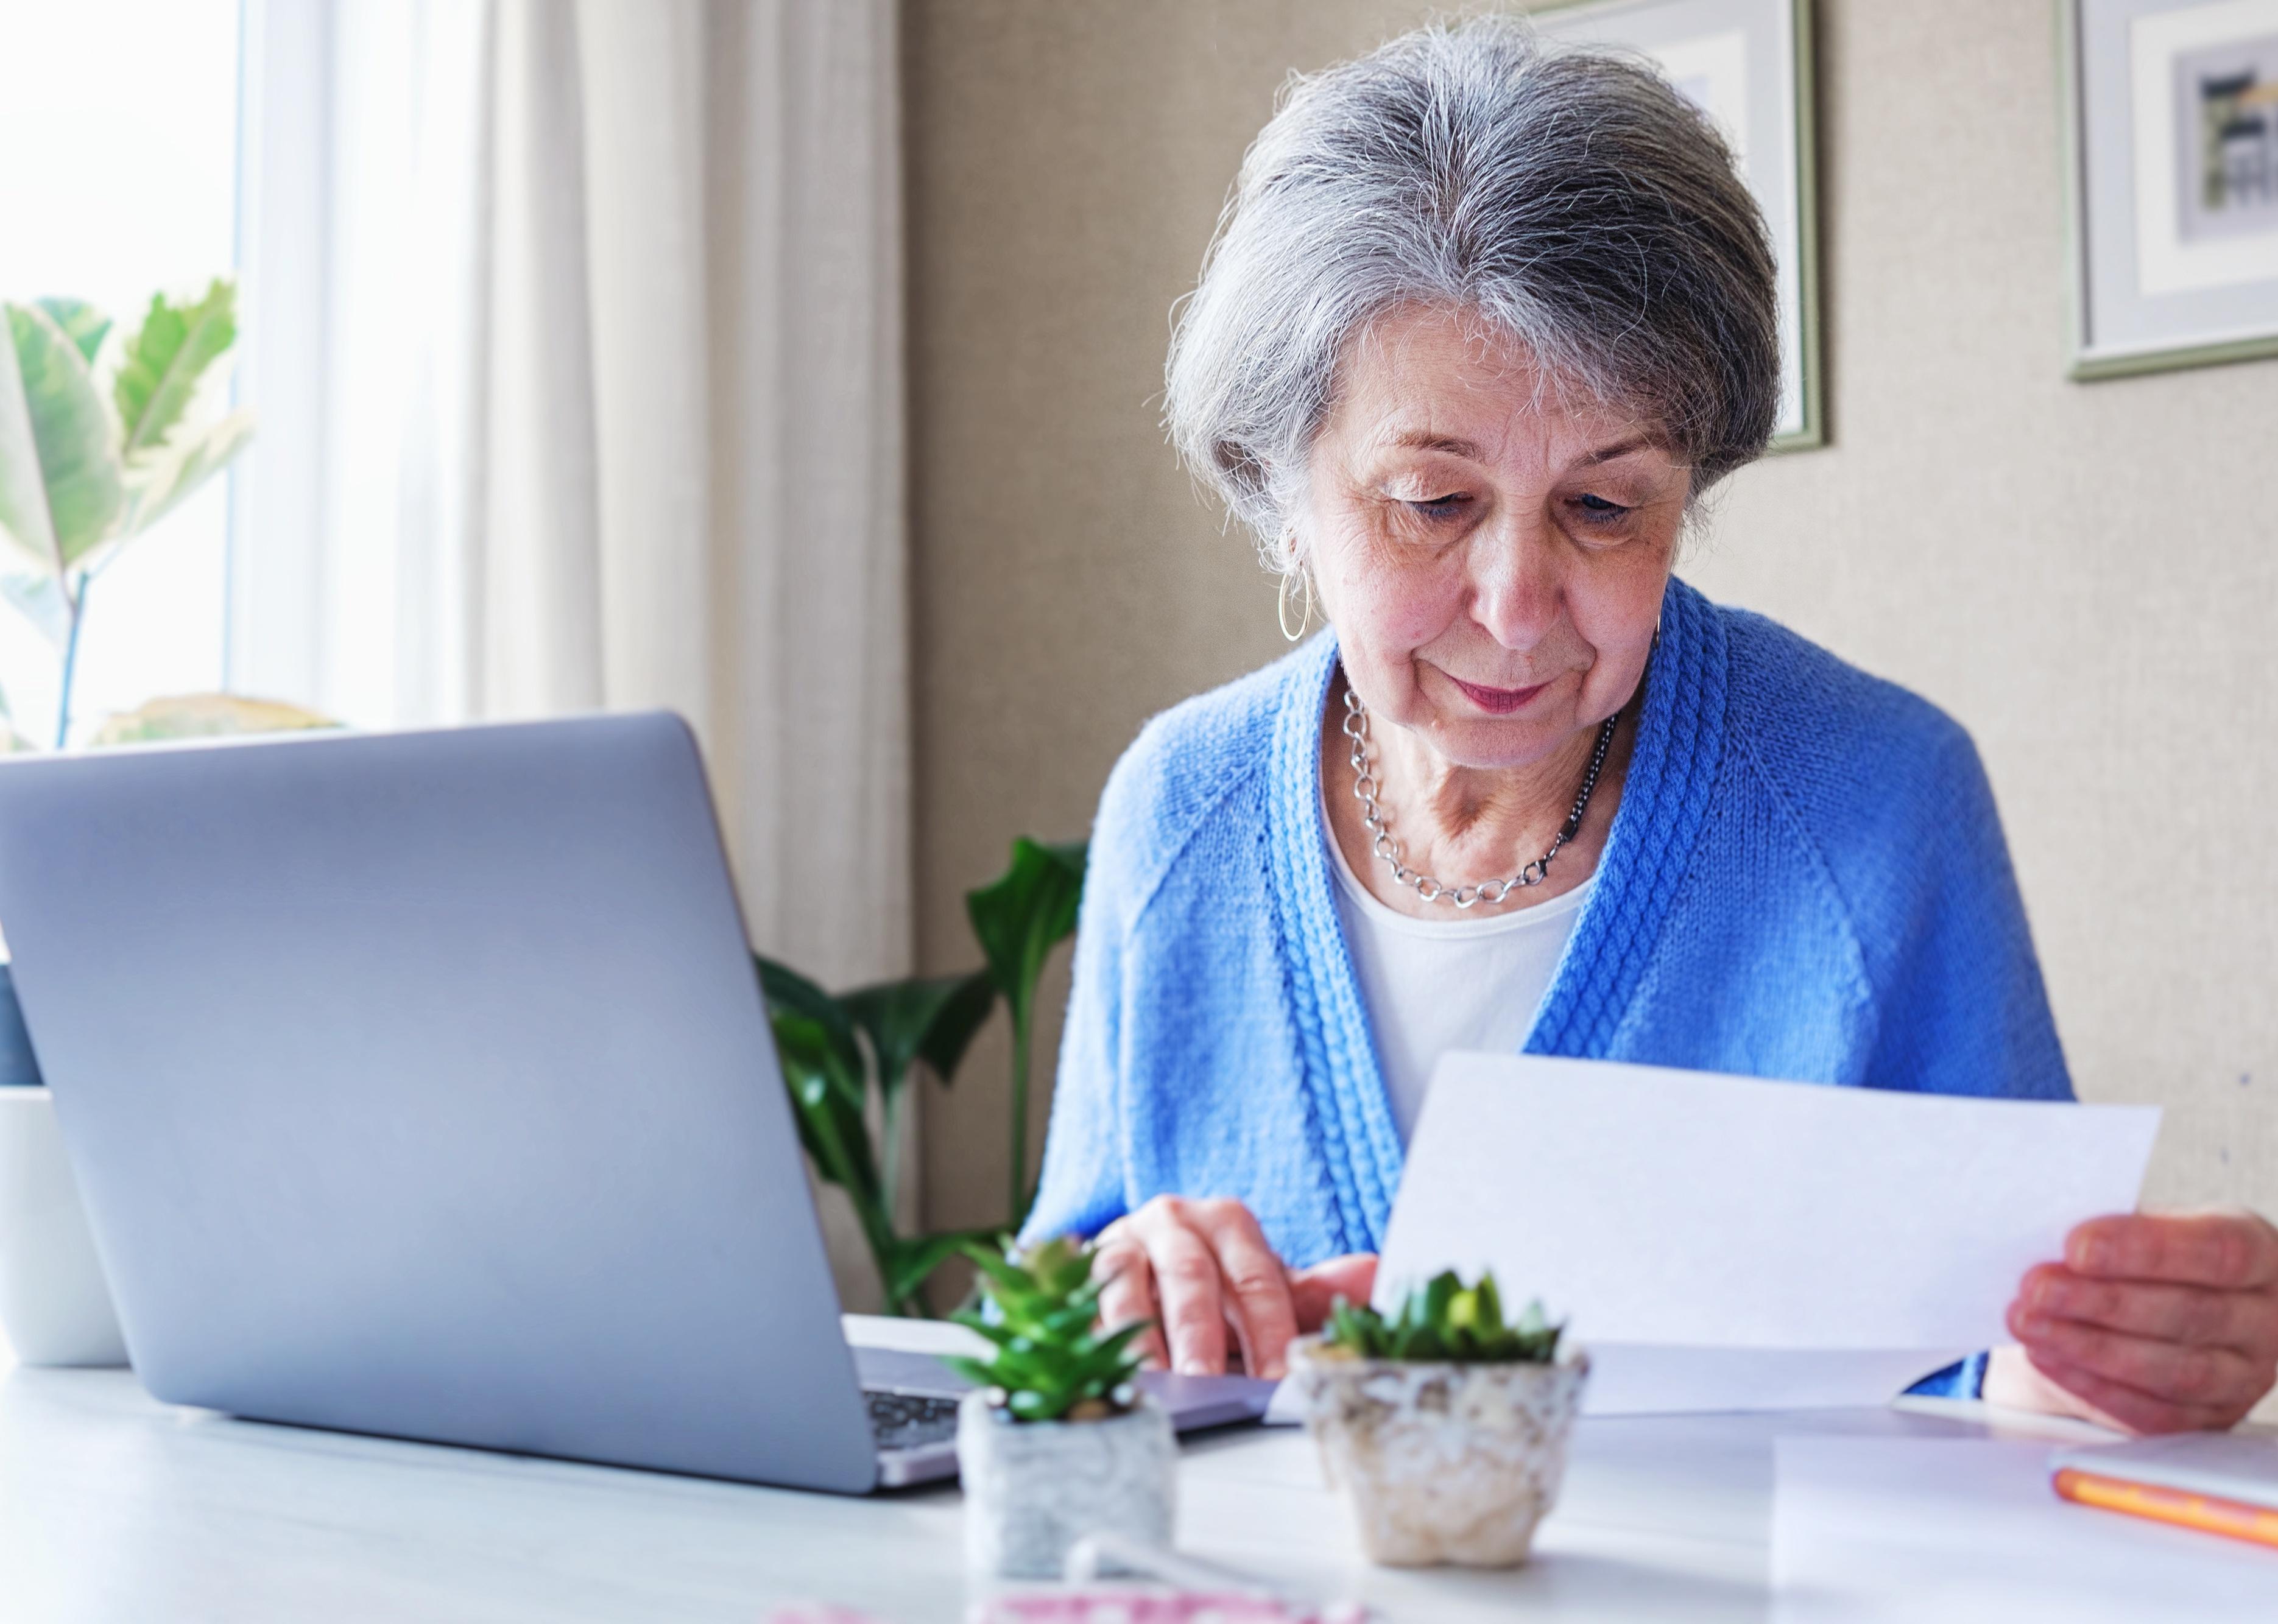 Elderly person reads a printed letter, sitting at a desk.